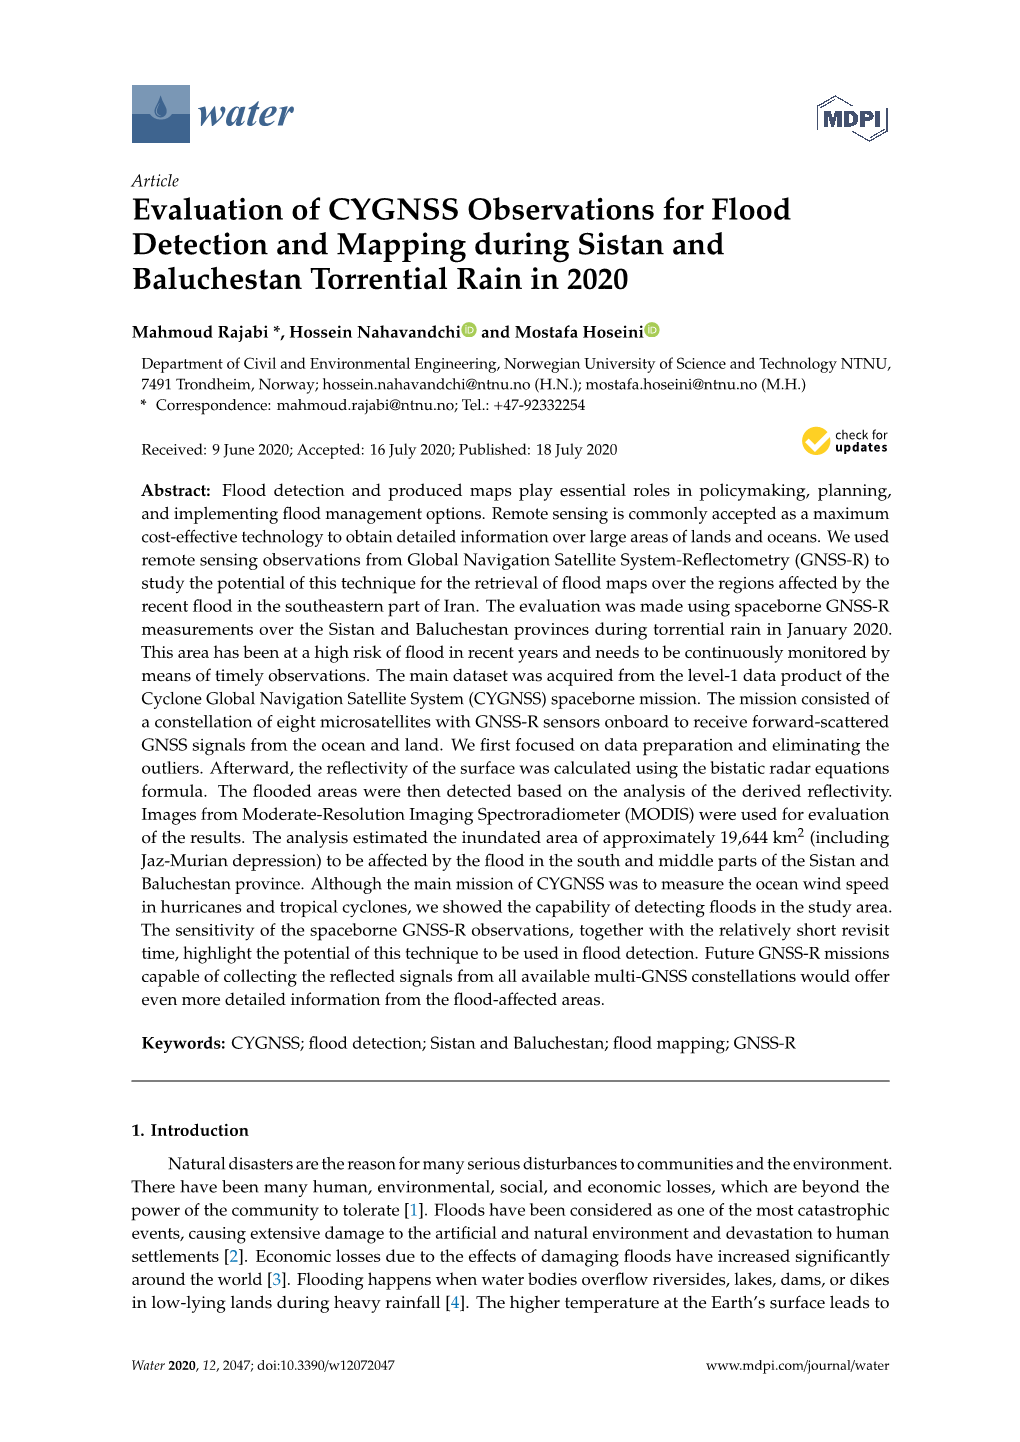 Evaluation of CYGNSS Observations for Flood Detection and Mapping During Sistan and Baluchestan Torrential Rain in 2020